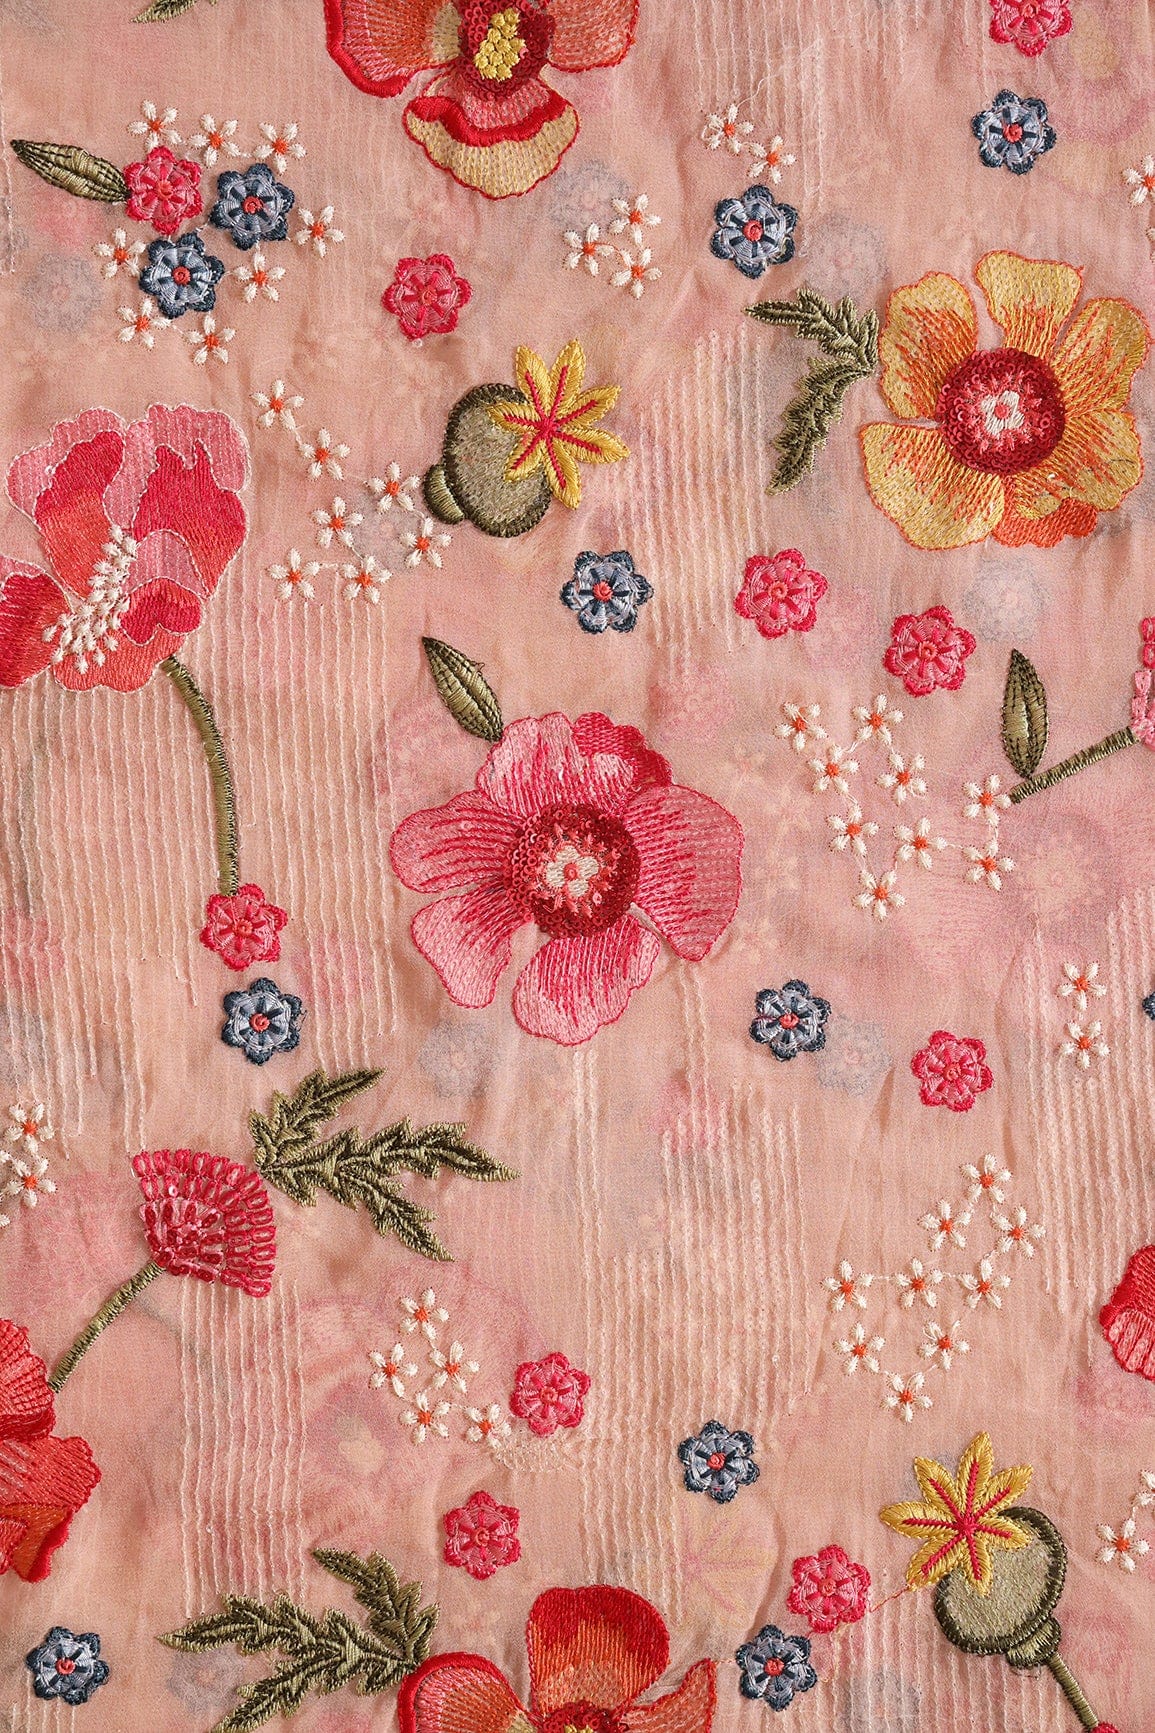 doeraa Embroidery Fabrics Beautiful Water Sequins With Multi Color Floral Embroidery On Peach Viscose Georgette Fabric